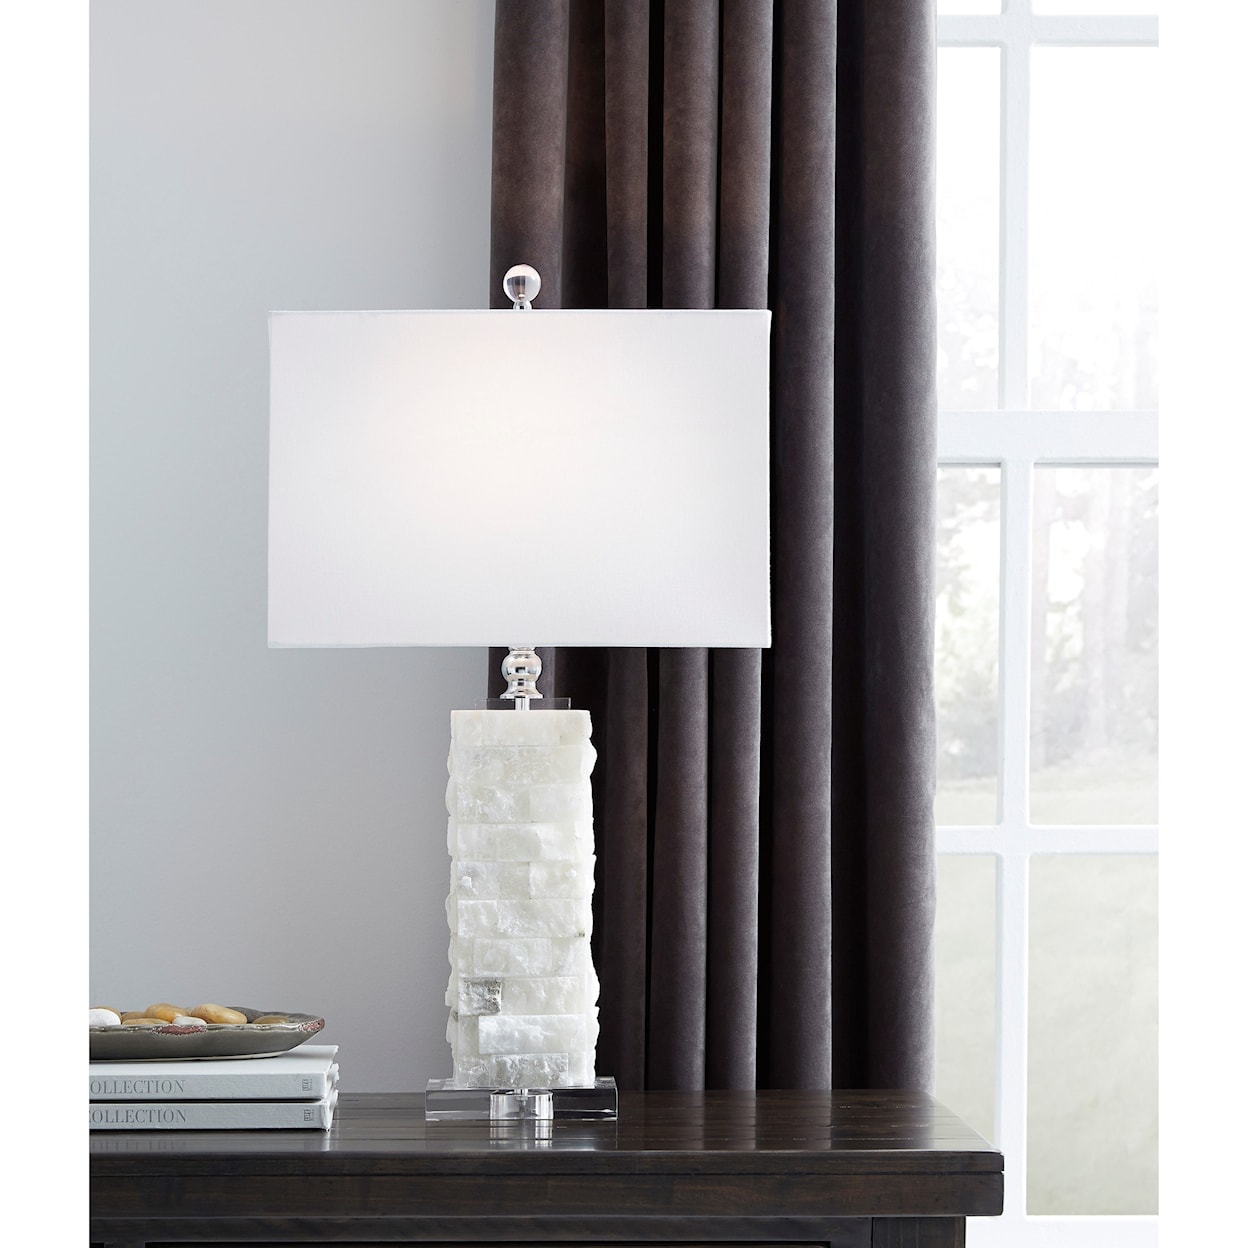 Signature Design by Ashley Lamps - Contemporary Malise White Alabaster Table Lamp